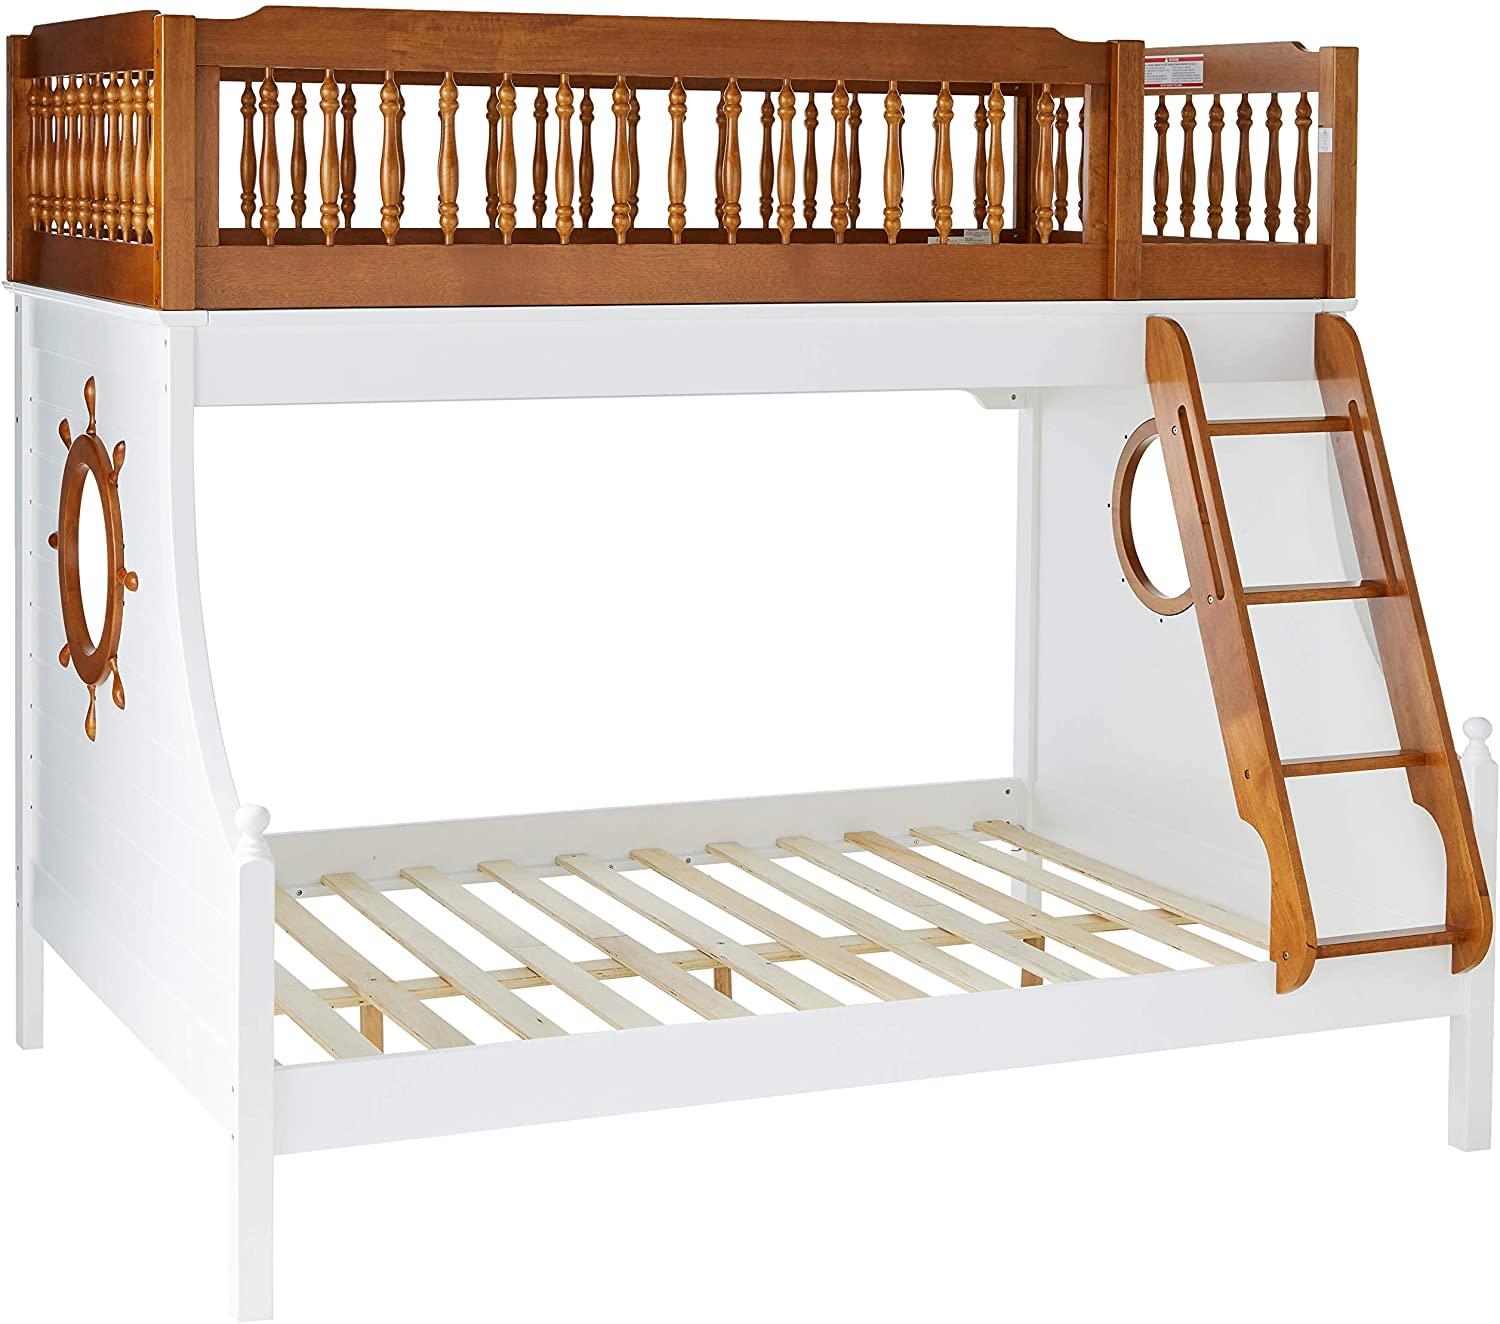 Transitional Twin/Full Bunk Bed Farah 37600 in Brown 